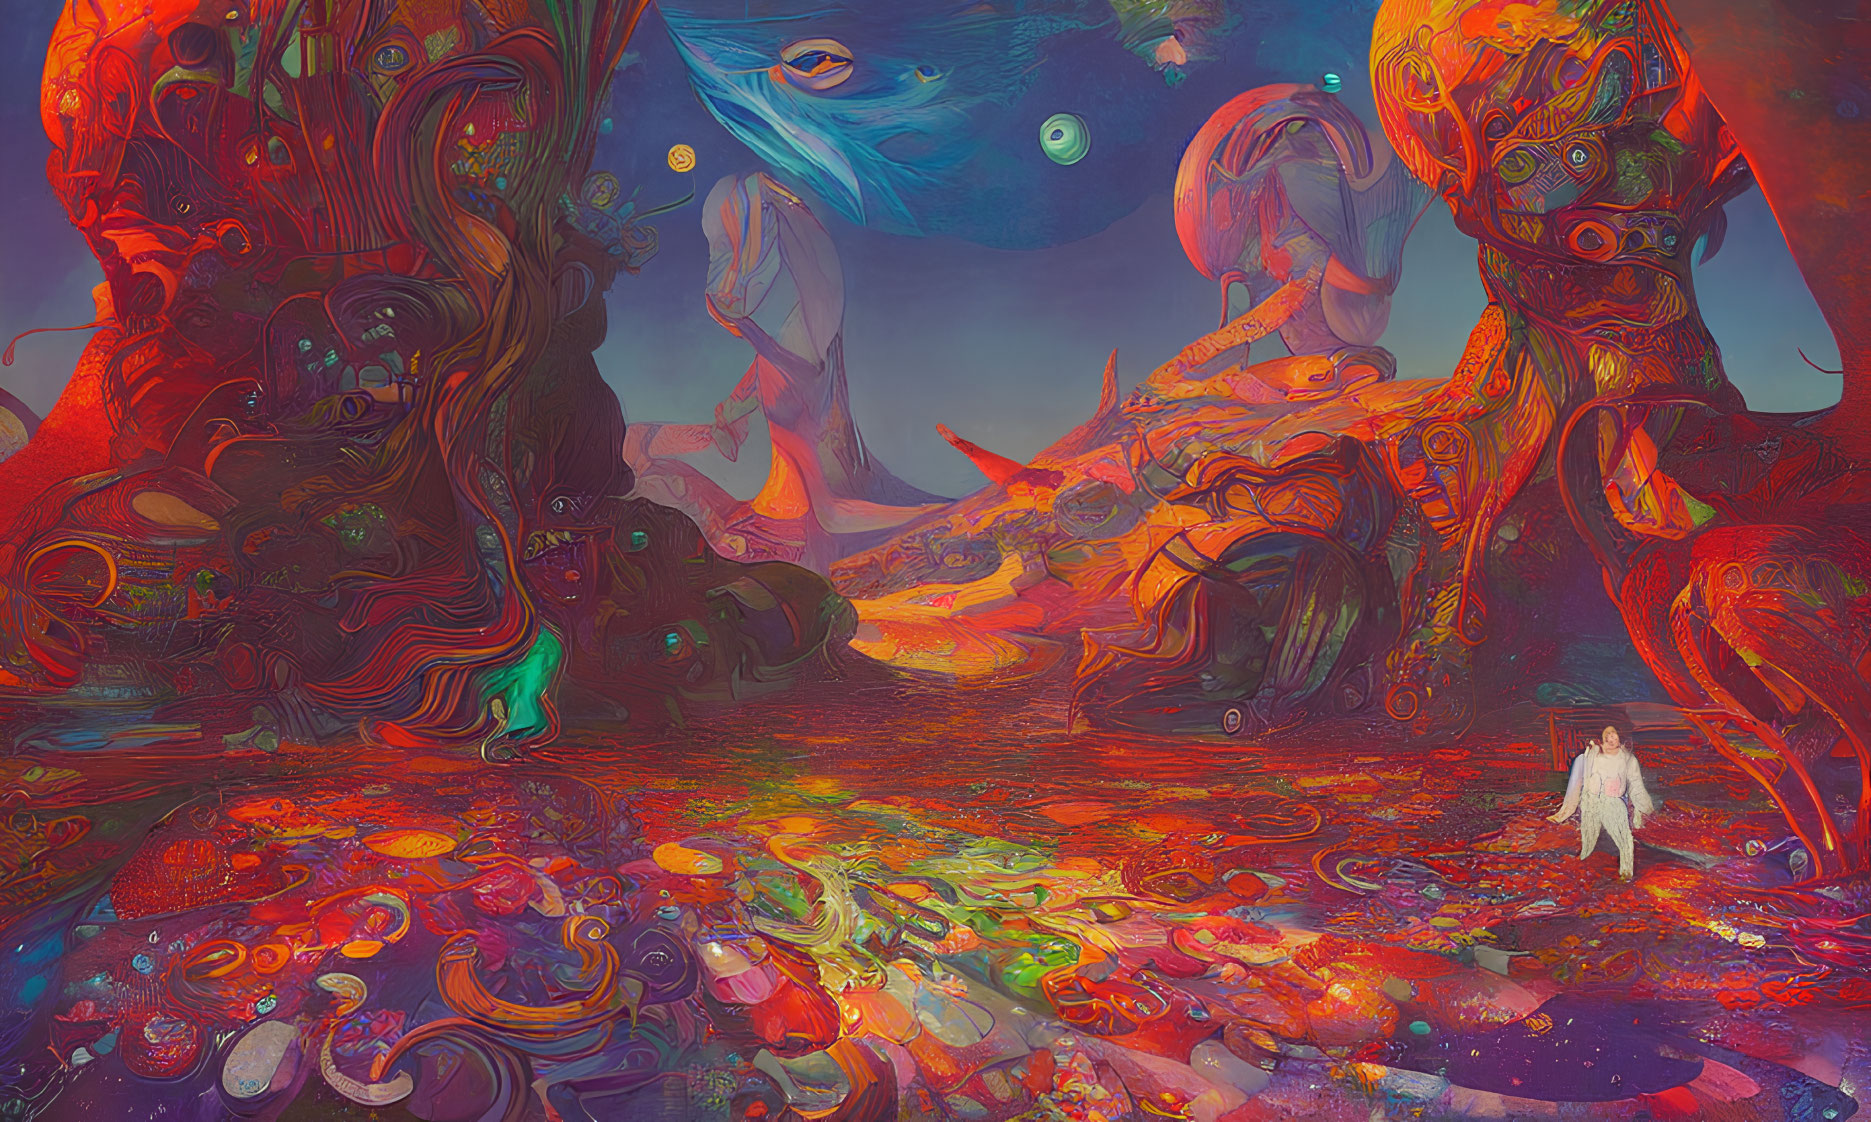 Surreal landscape with astronaut in psychedelic terrain